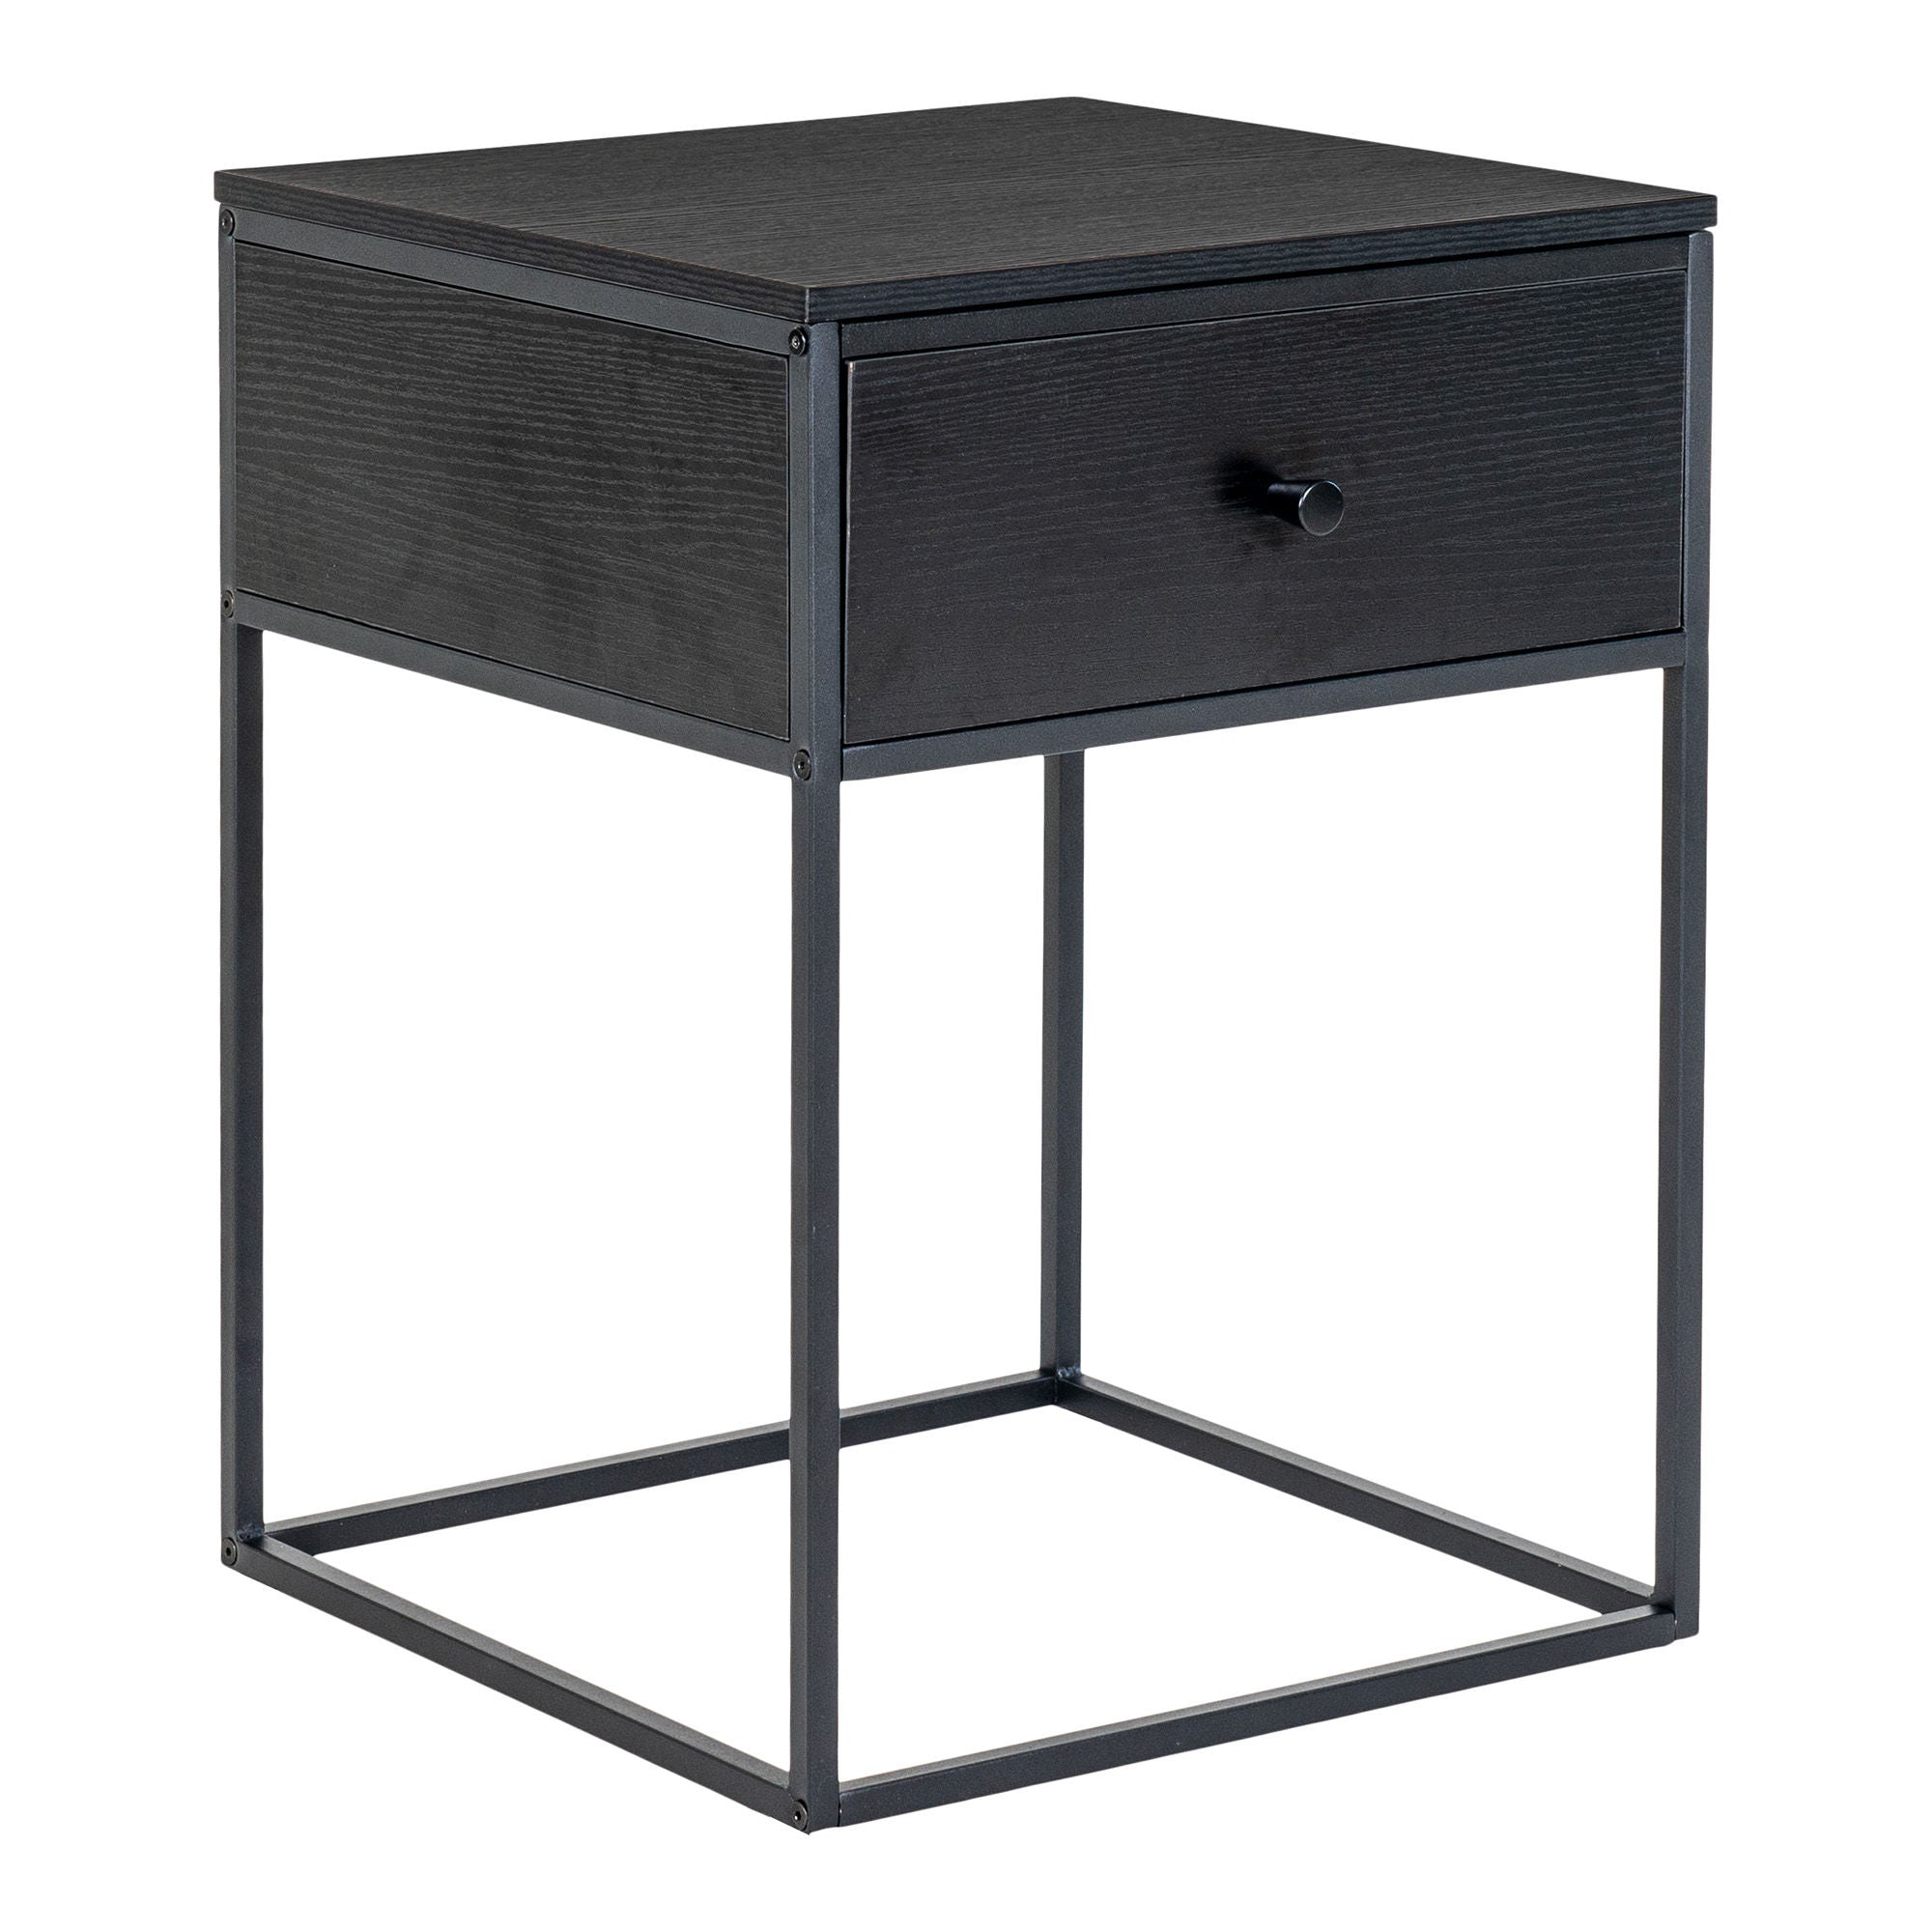 House Nordic Vita Bedside table with 1 drawer